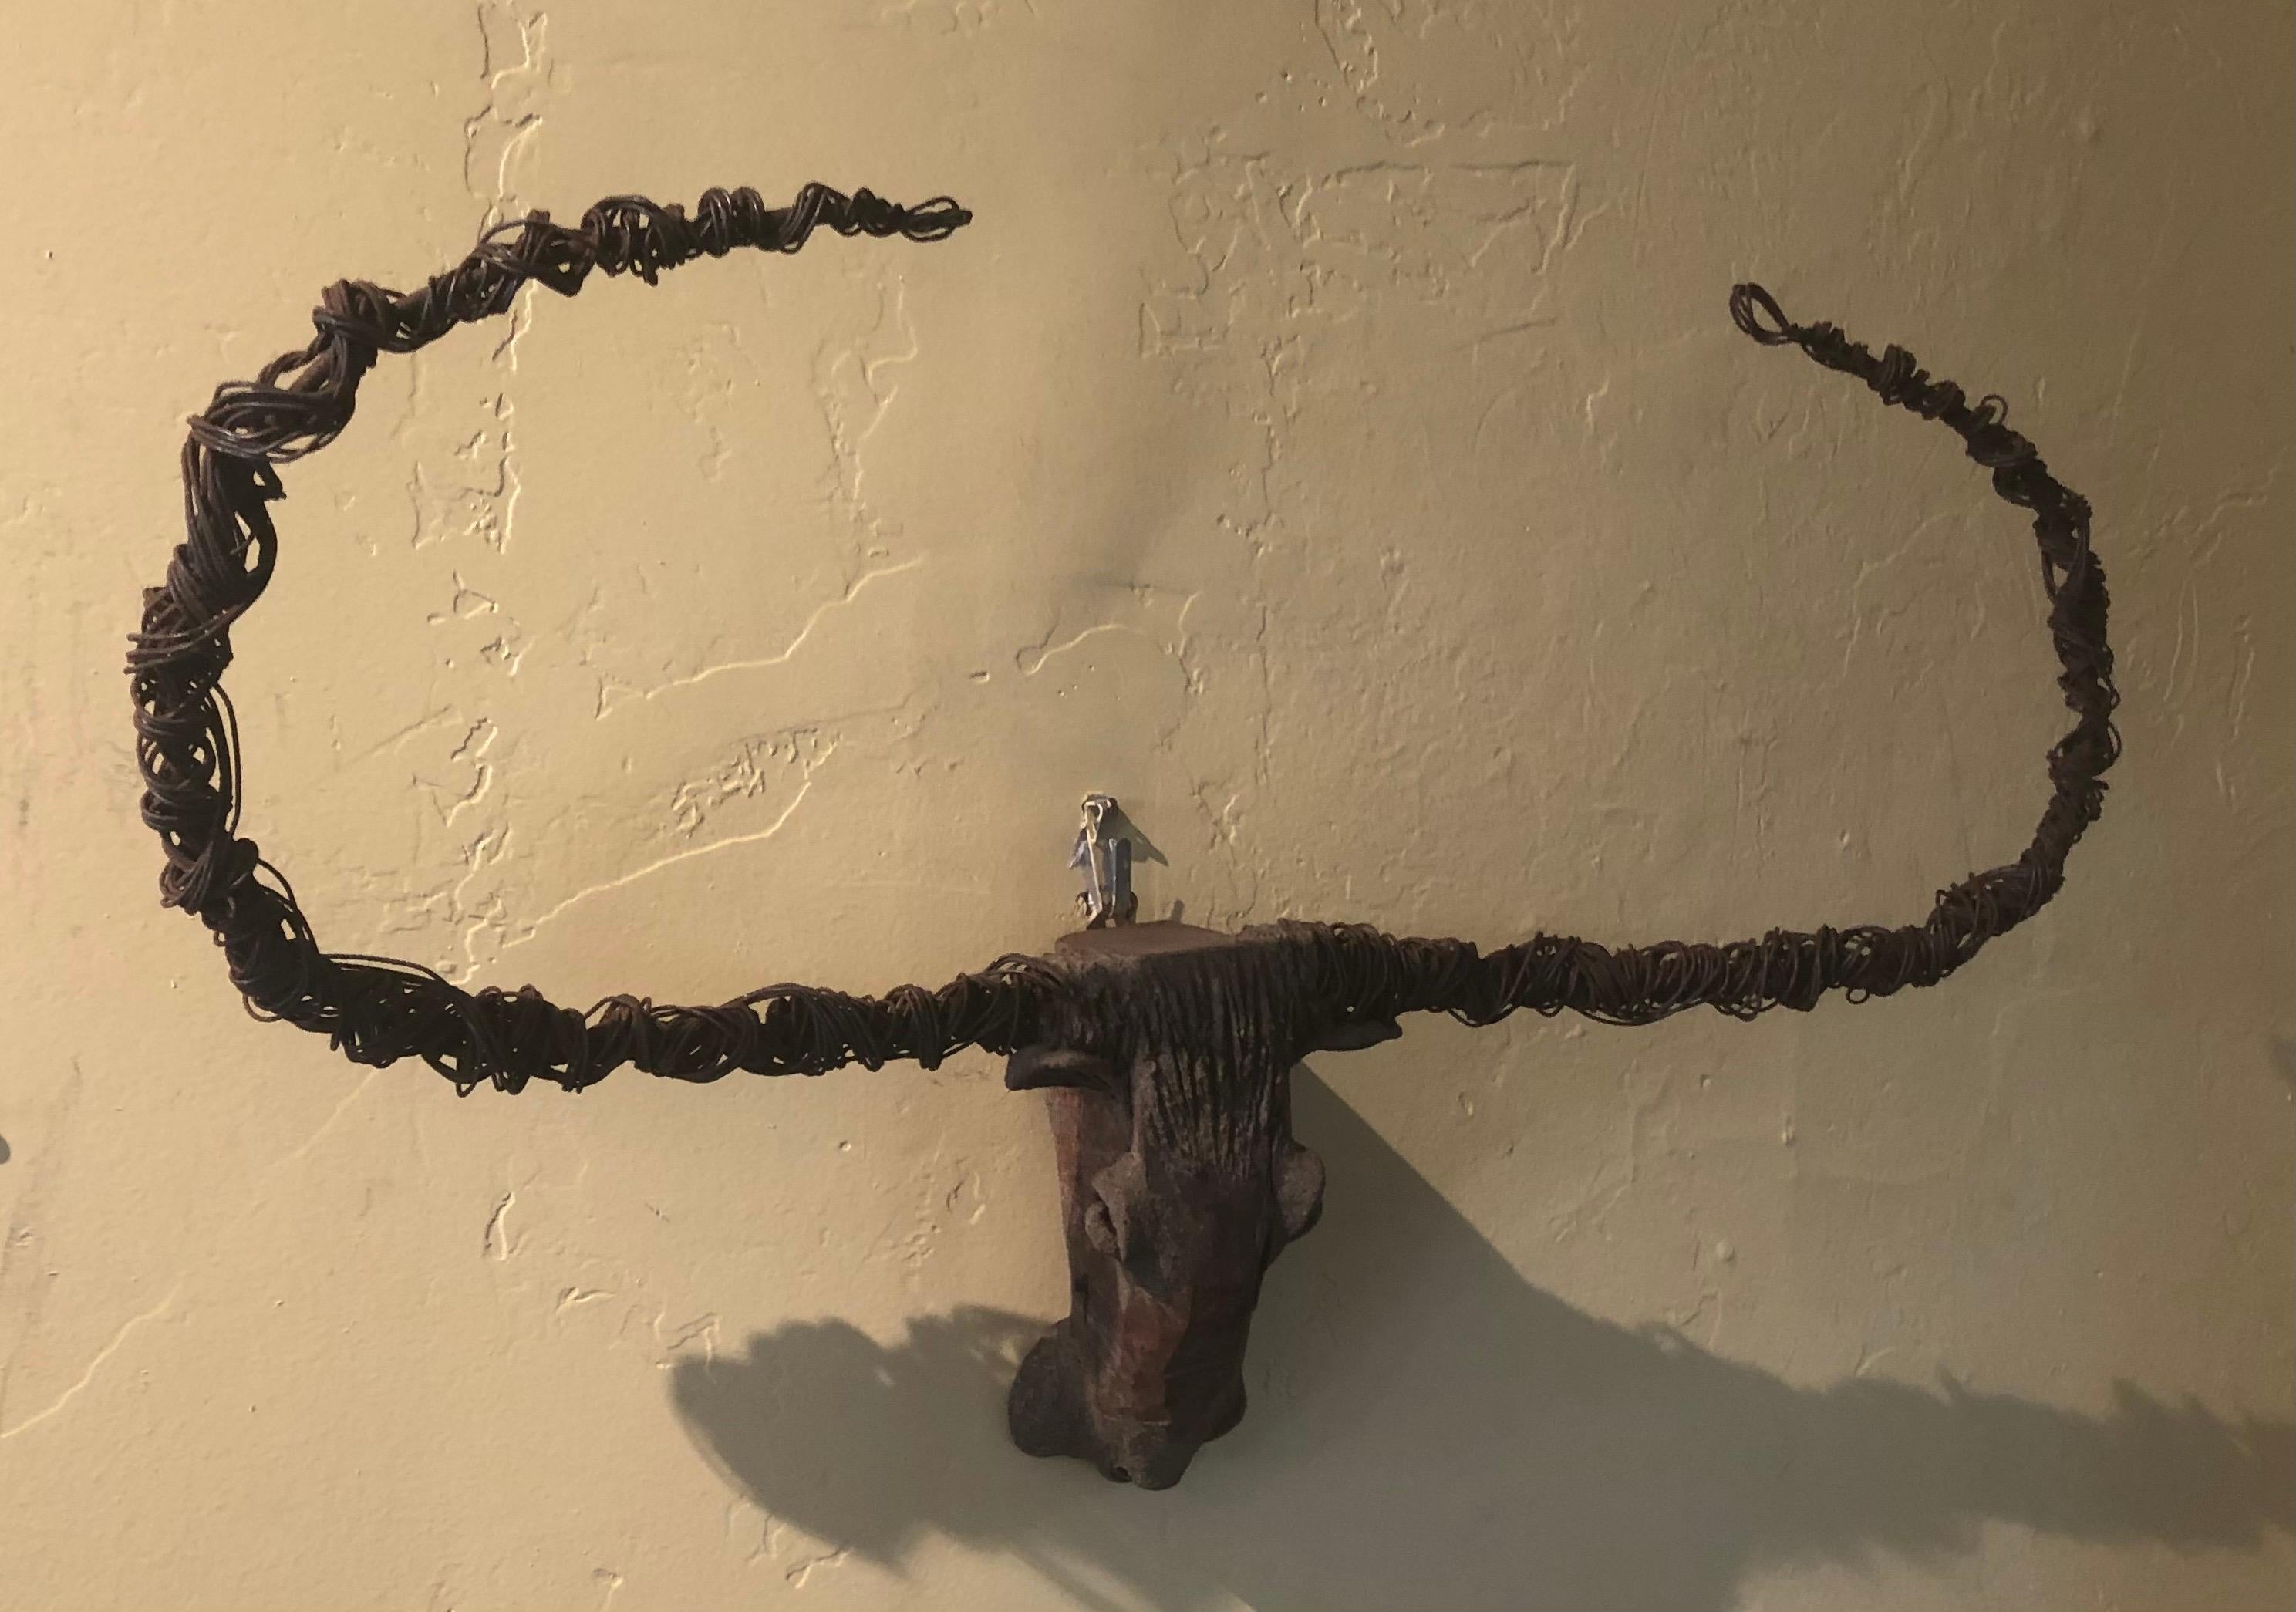 A super cool artisan handmade bull skull with horns sculpture made of pottery, wood and wire, circa 1990s. The piece has a great worn patina and measures 4.5